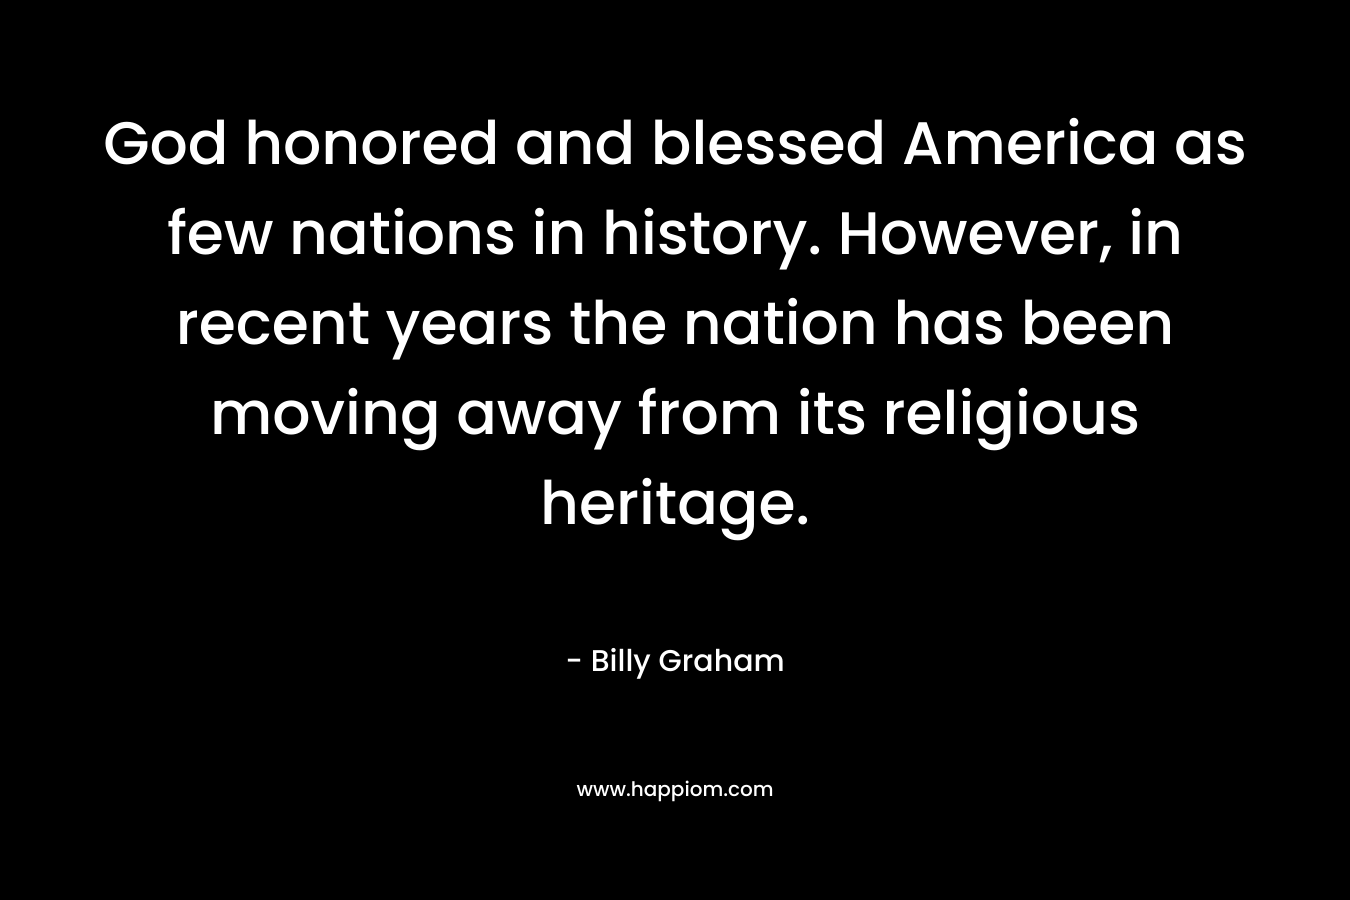 God honored and blessed America as few nations in history. However, in recent years the nation has been moving away from its religious heritage. – Billy Graham